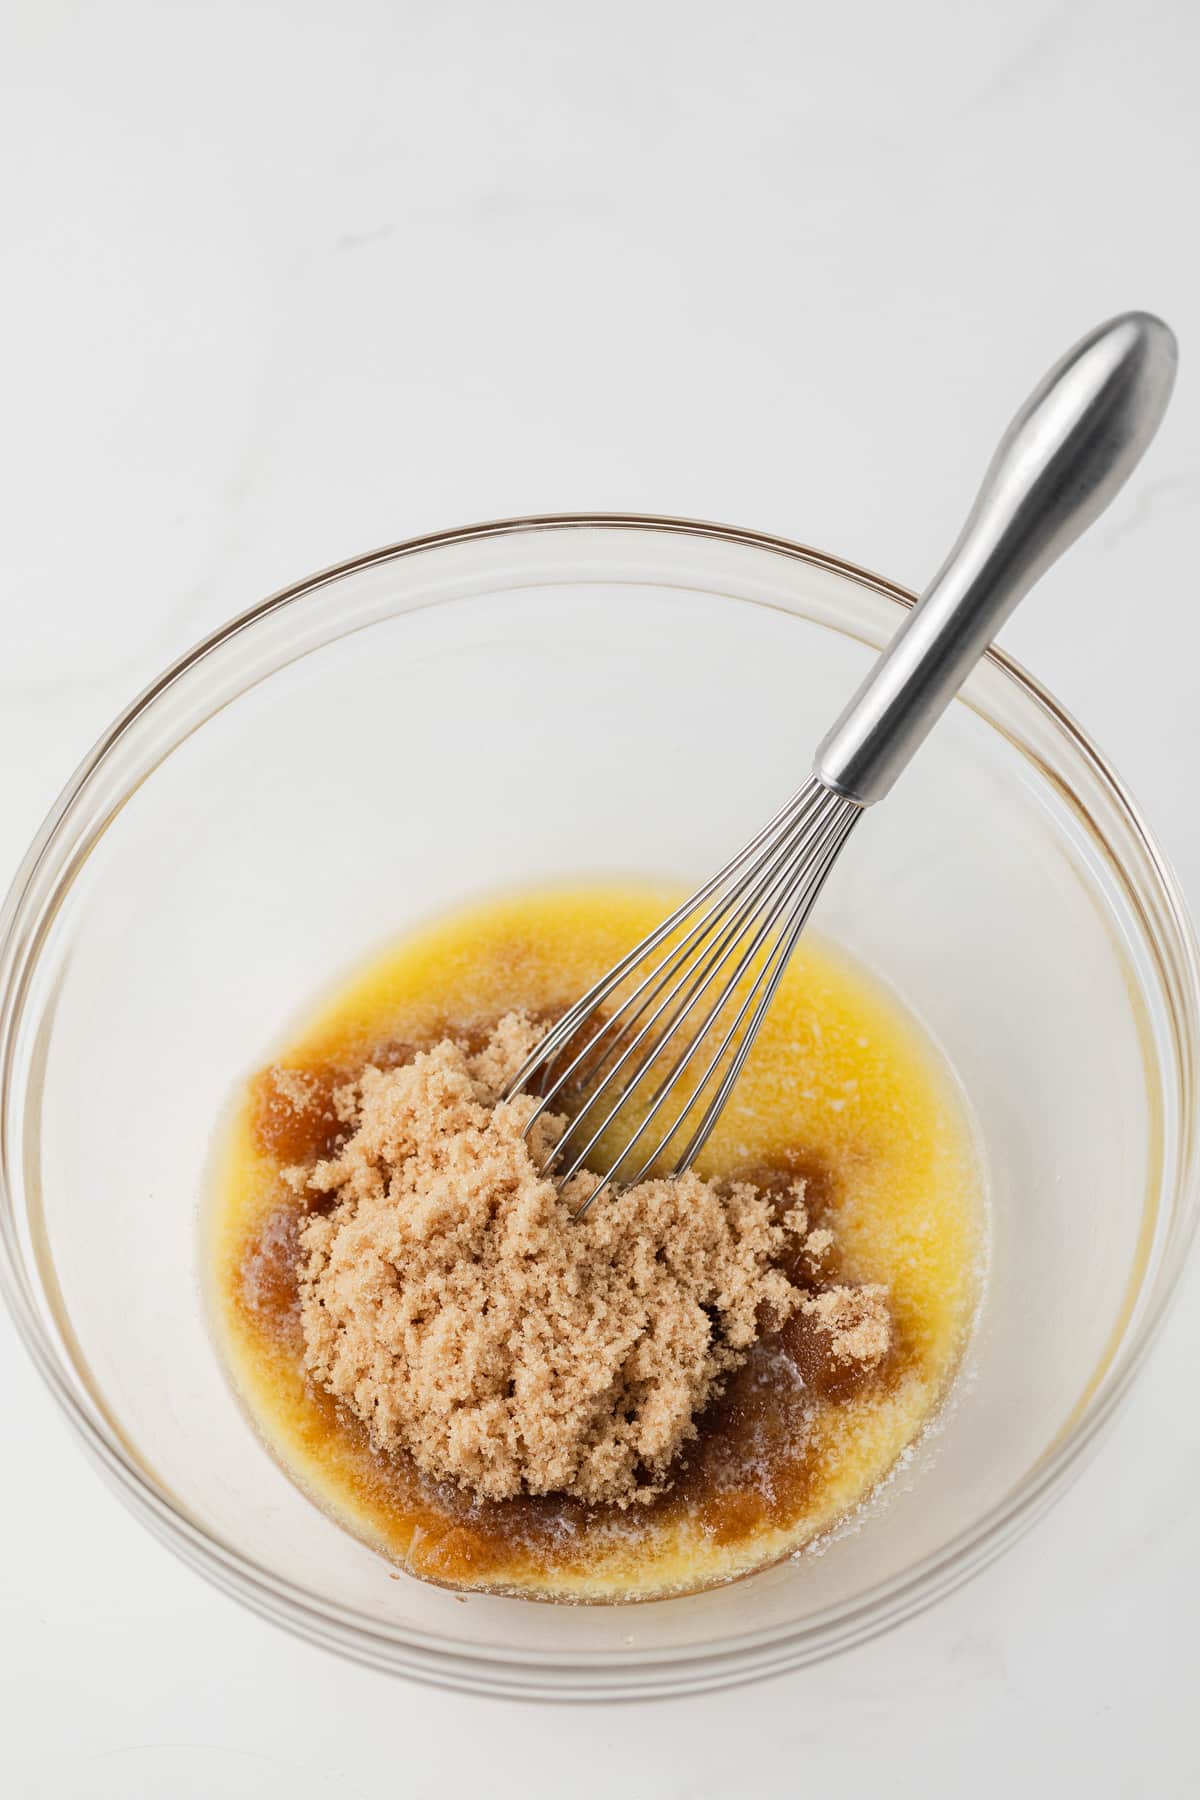 Brown sugar and butter in glass mixing bowl.